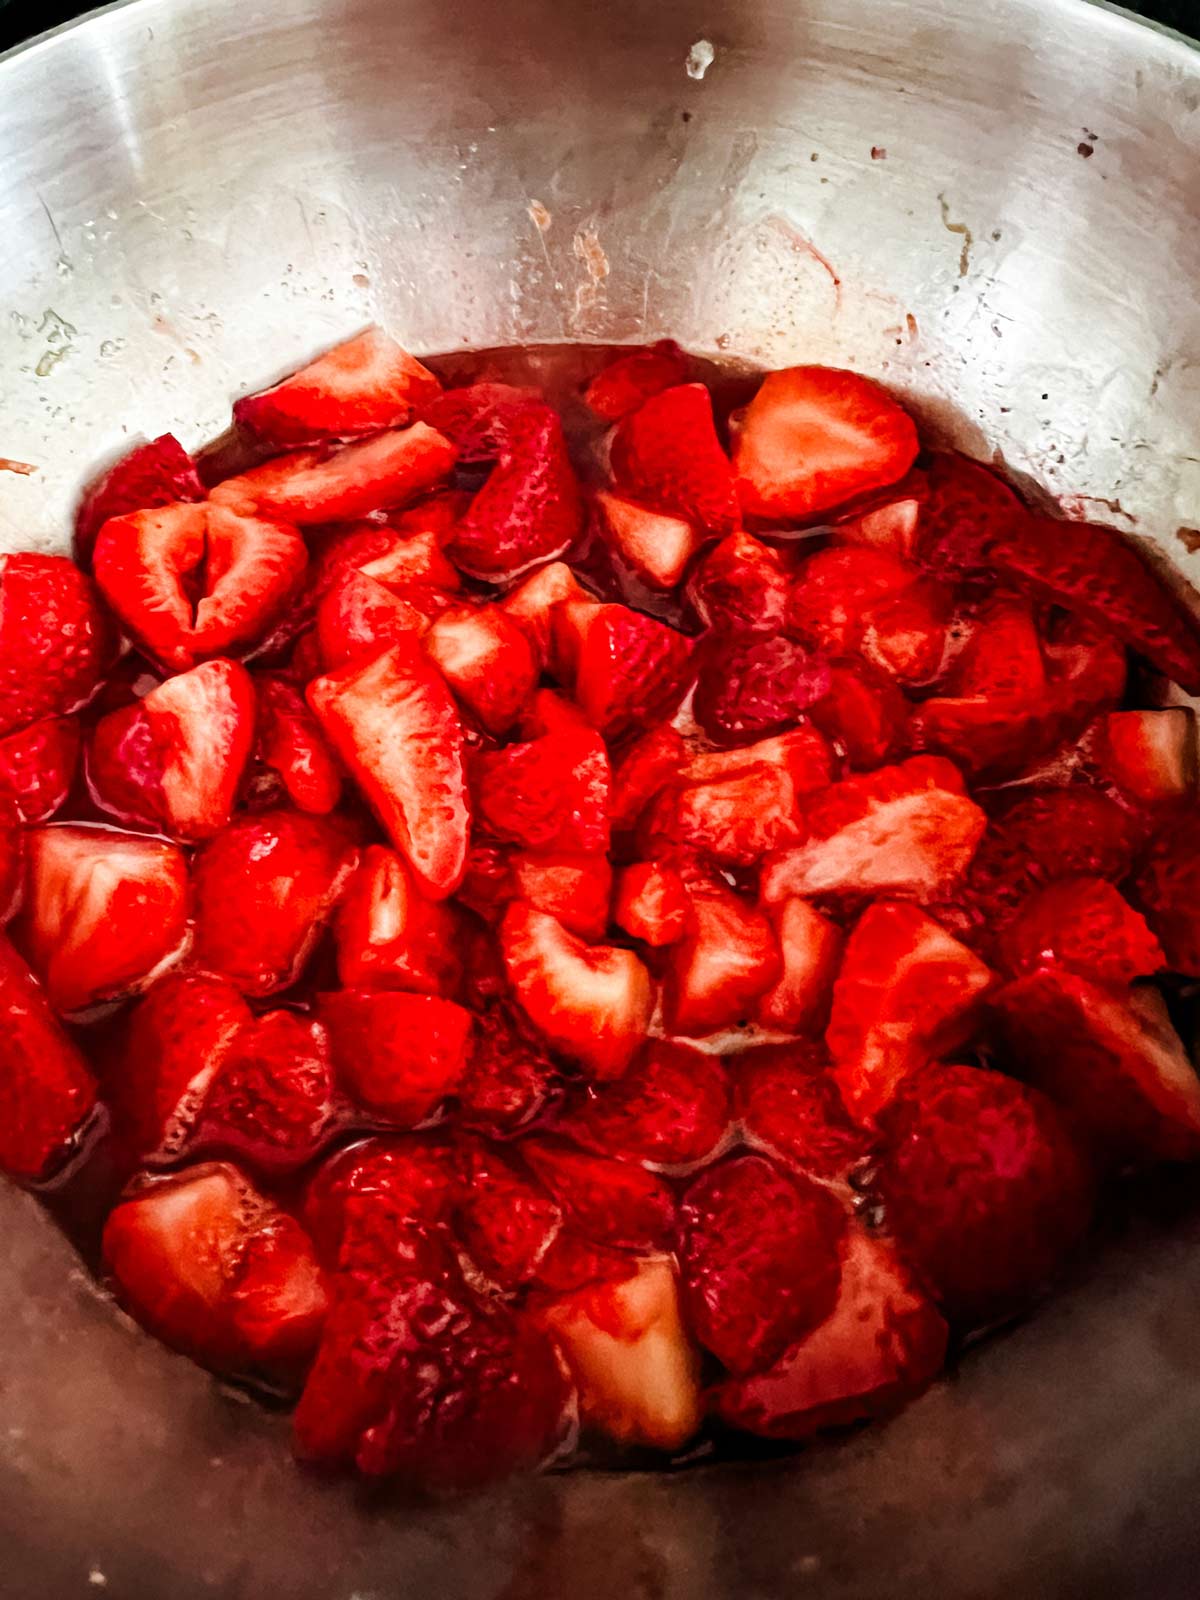 Sliced strawberries in a saucepan to make strawberry compote.